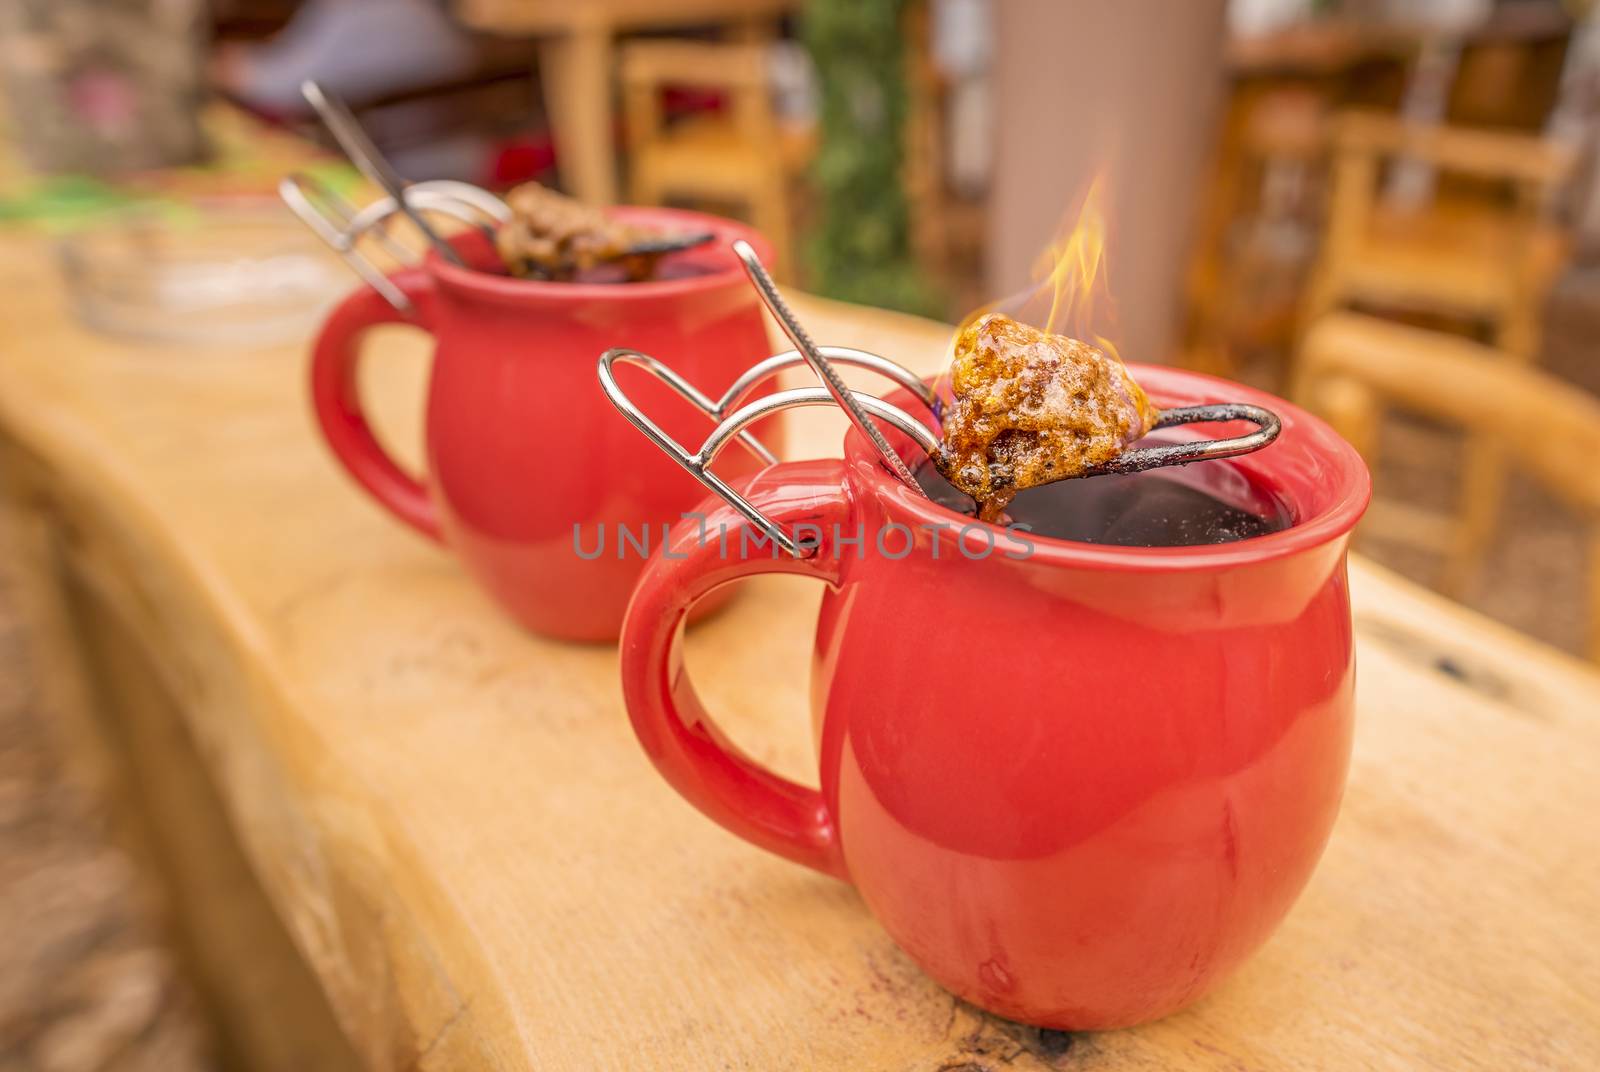 Image with a mug of hot wine, which has tongs with a flaming cone of sugar on top. It is a traditional german drink at Christmas fairs, called "Feuerzangentasse", meaning Fire Cup.